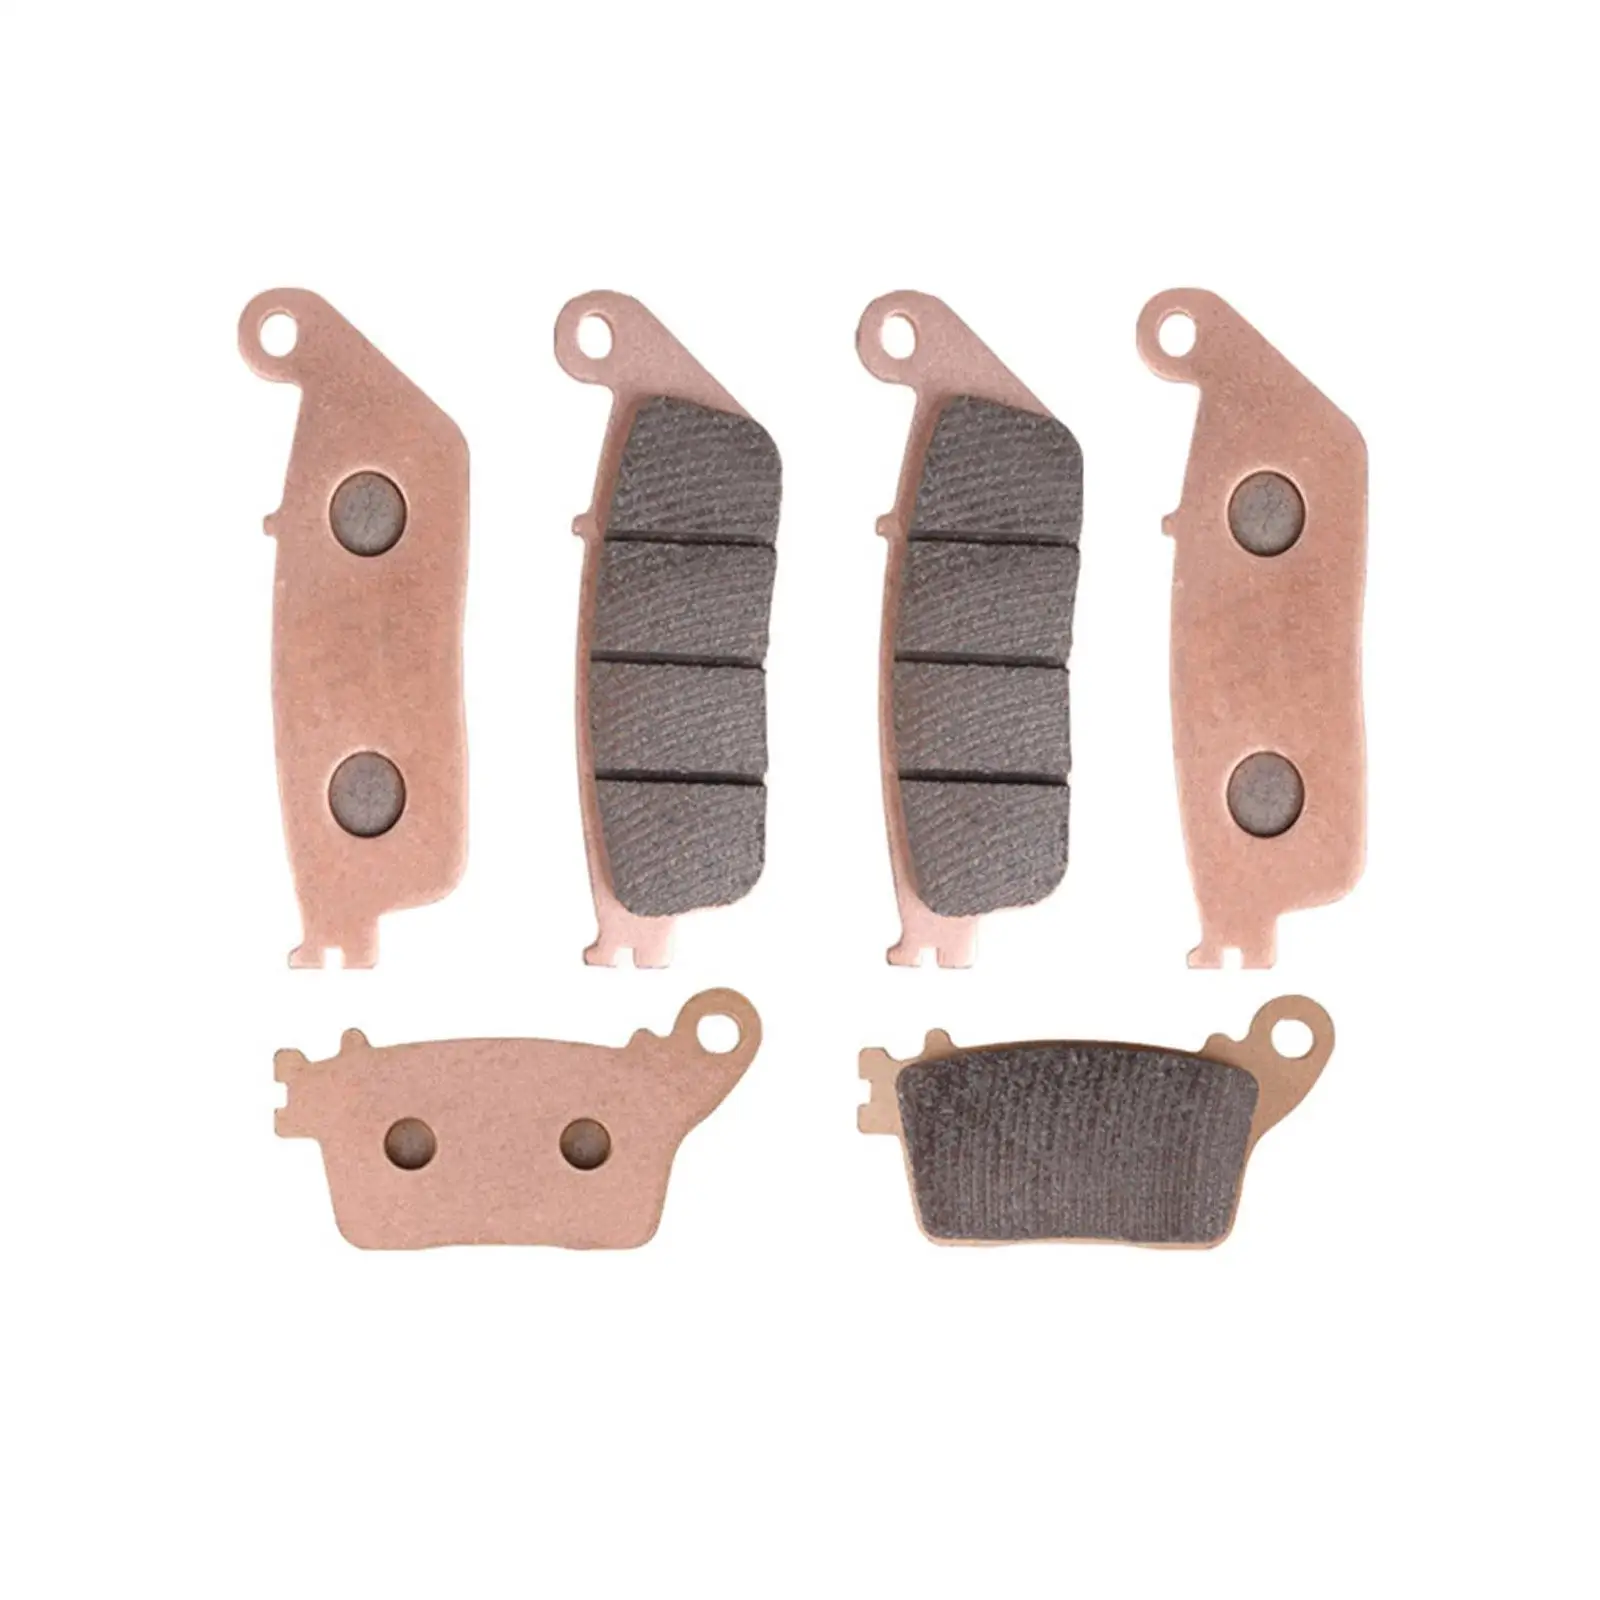 6 Pieces Front and Rear Brake Pads Set Brake Pads performance of Honda